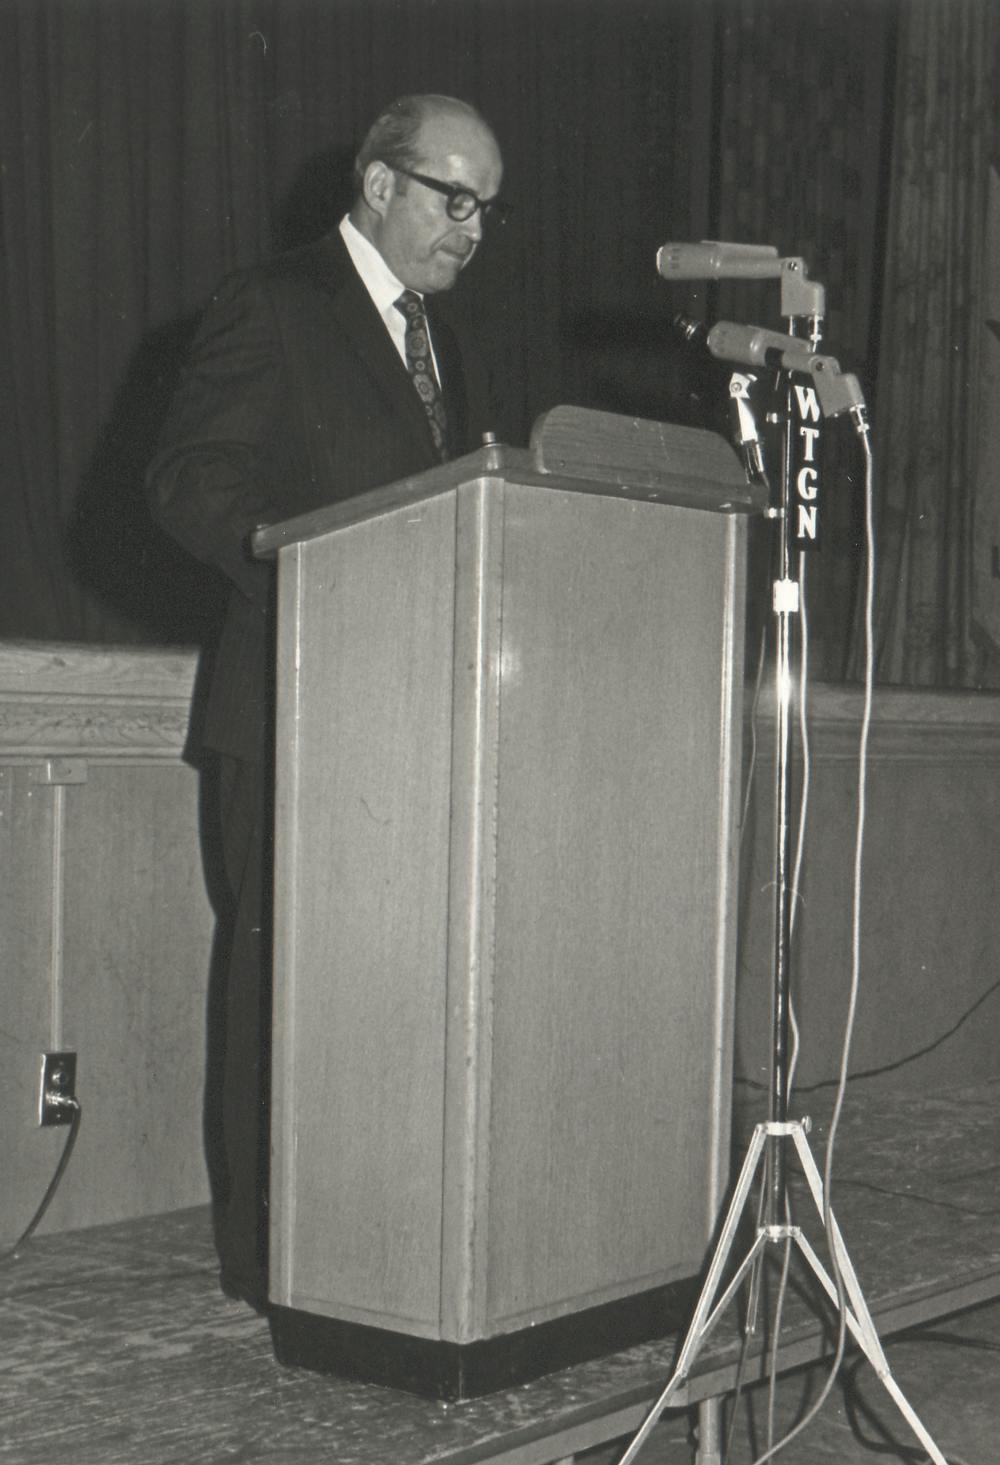 Stanley speaking at the WTGN radio station